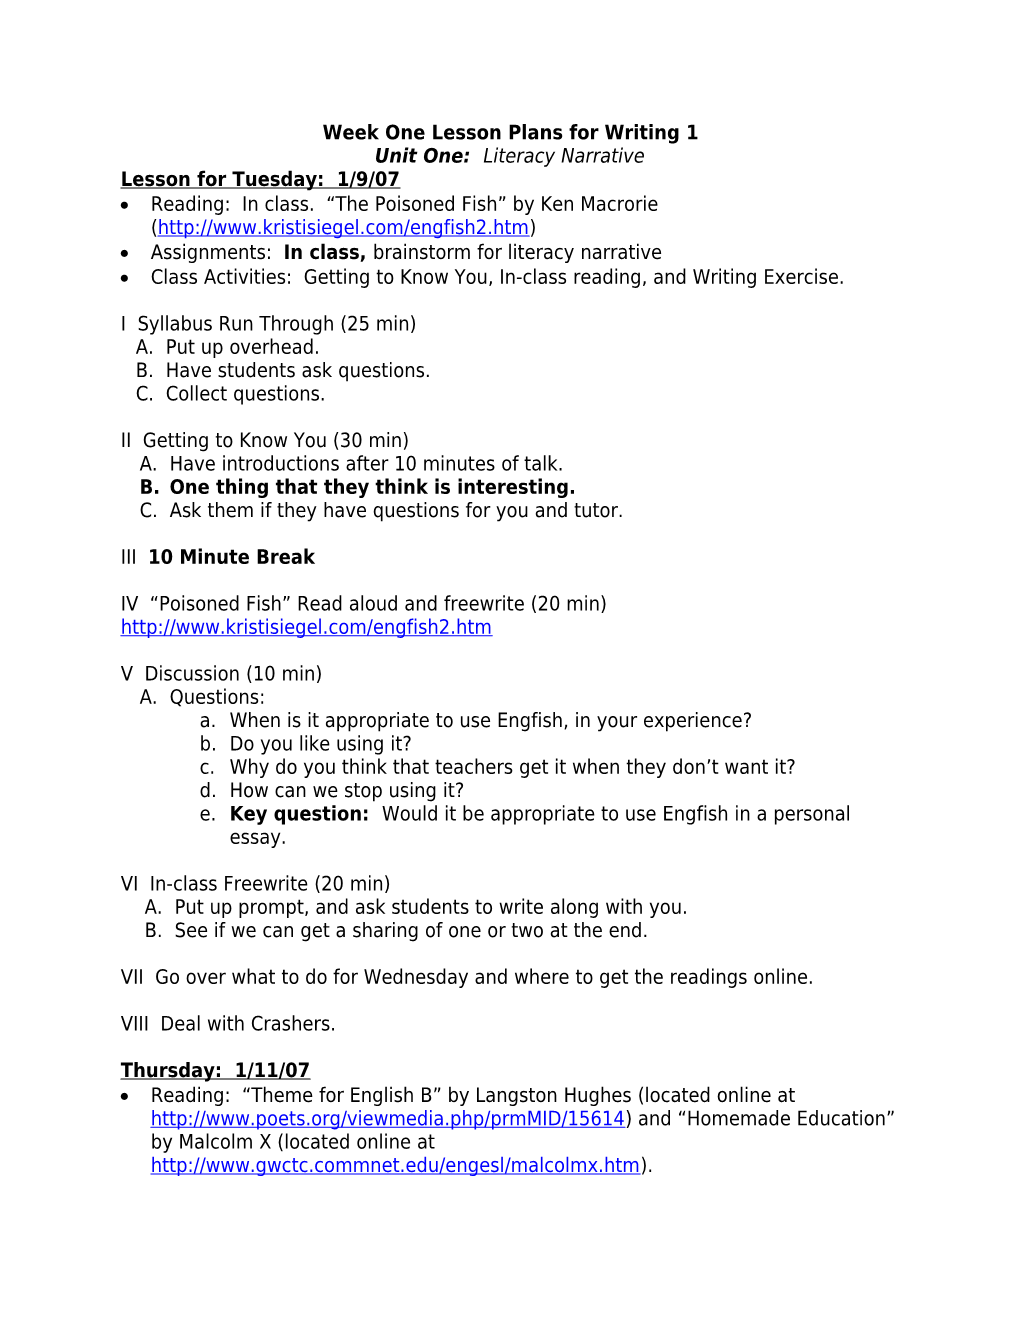 Week One Lesson Plans for Writing 1: MW 2-3:50 P